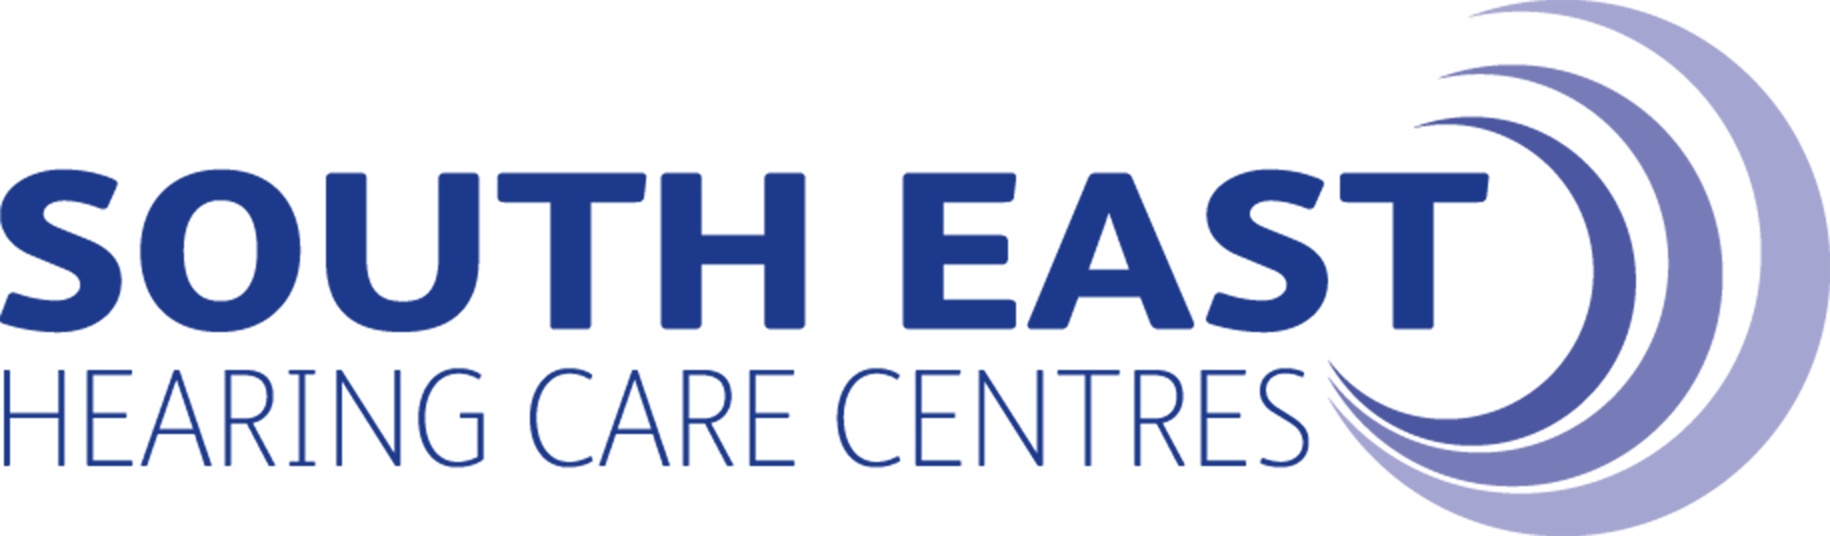 South Eash Hearing Care Centers - Sussex